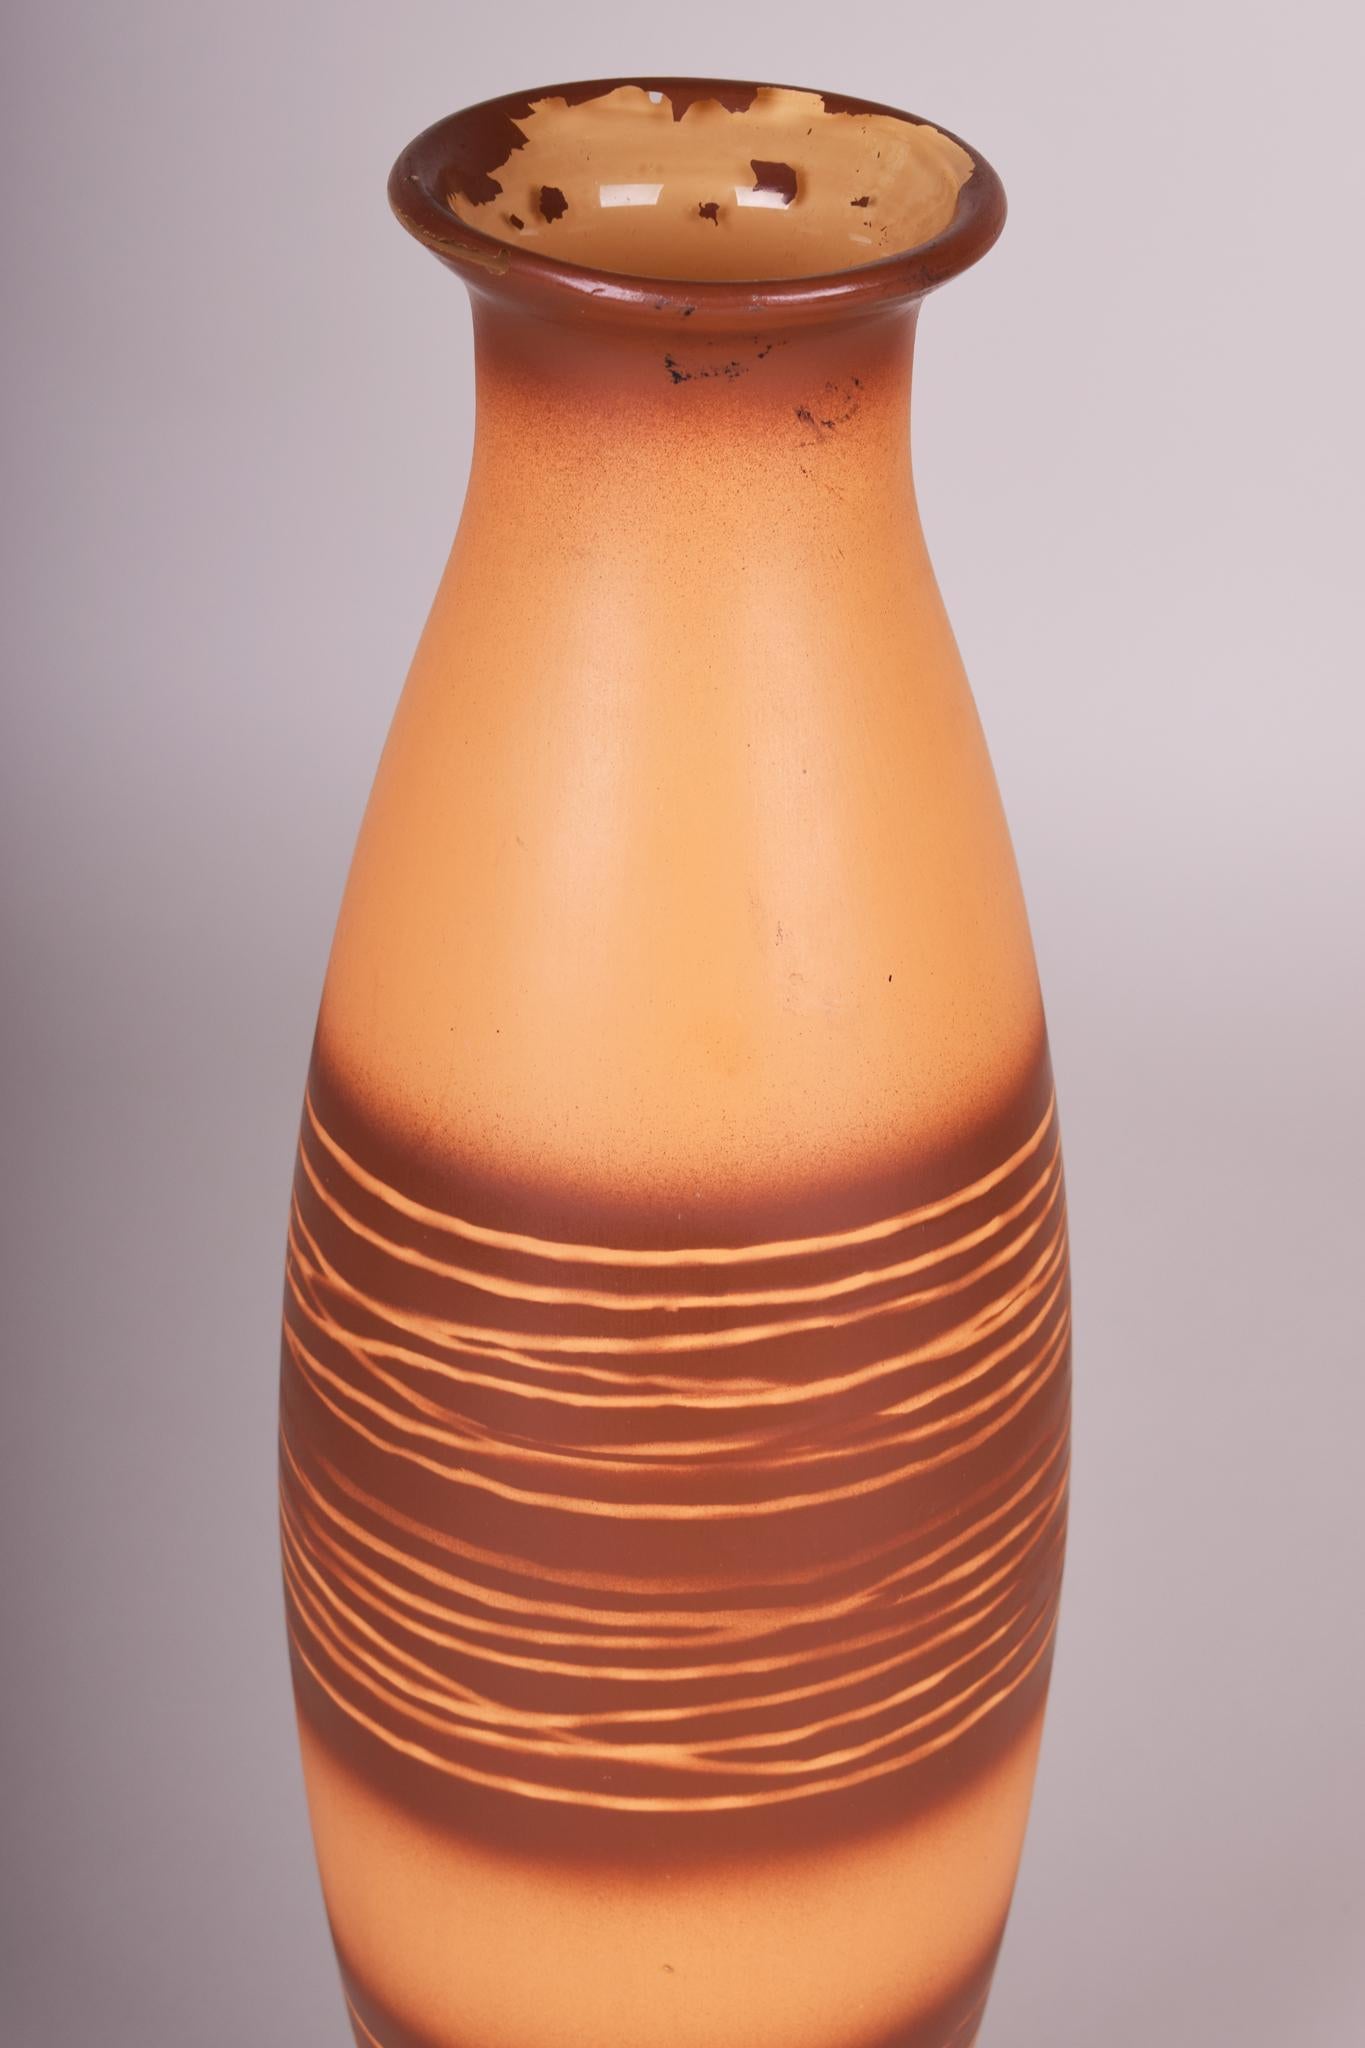 Made in the 1950s out of cast ceramic, glossy glaze in Bohemia, now Czech Republic.